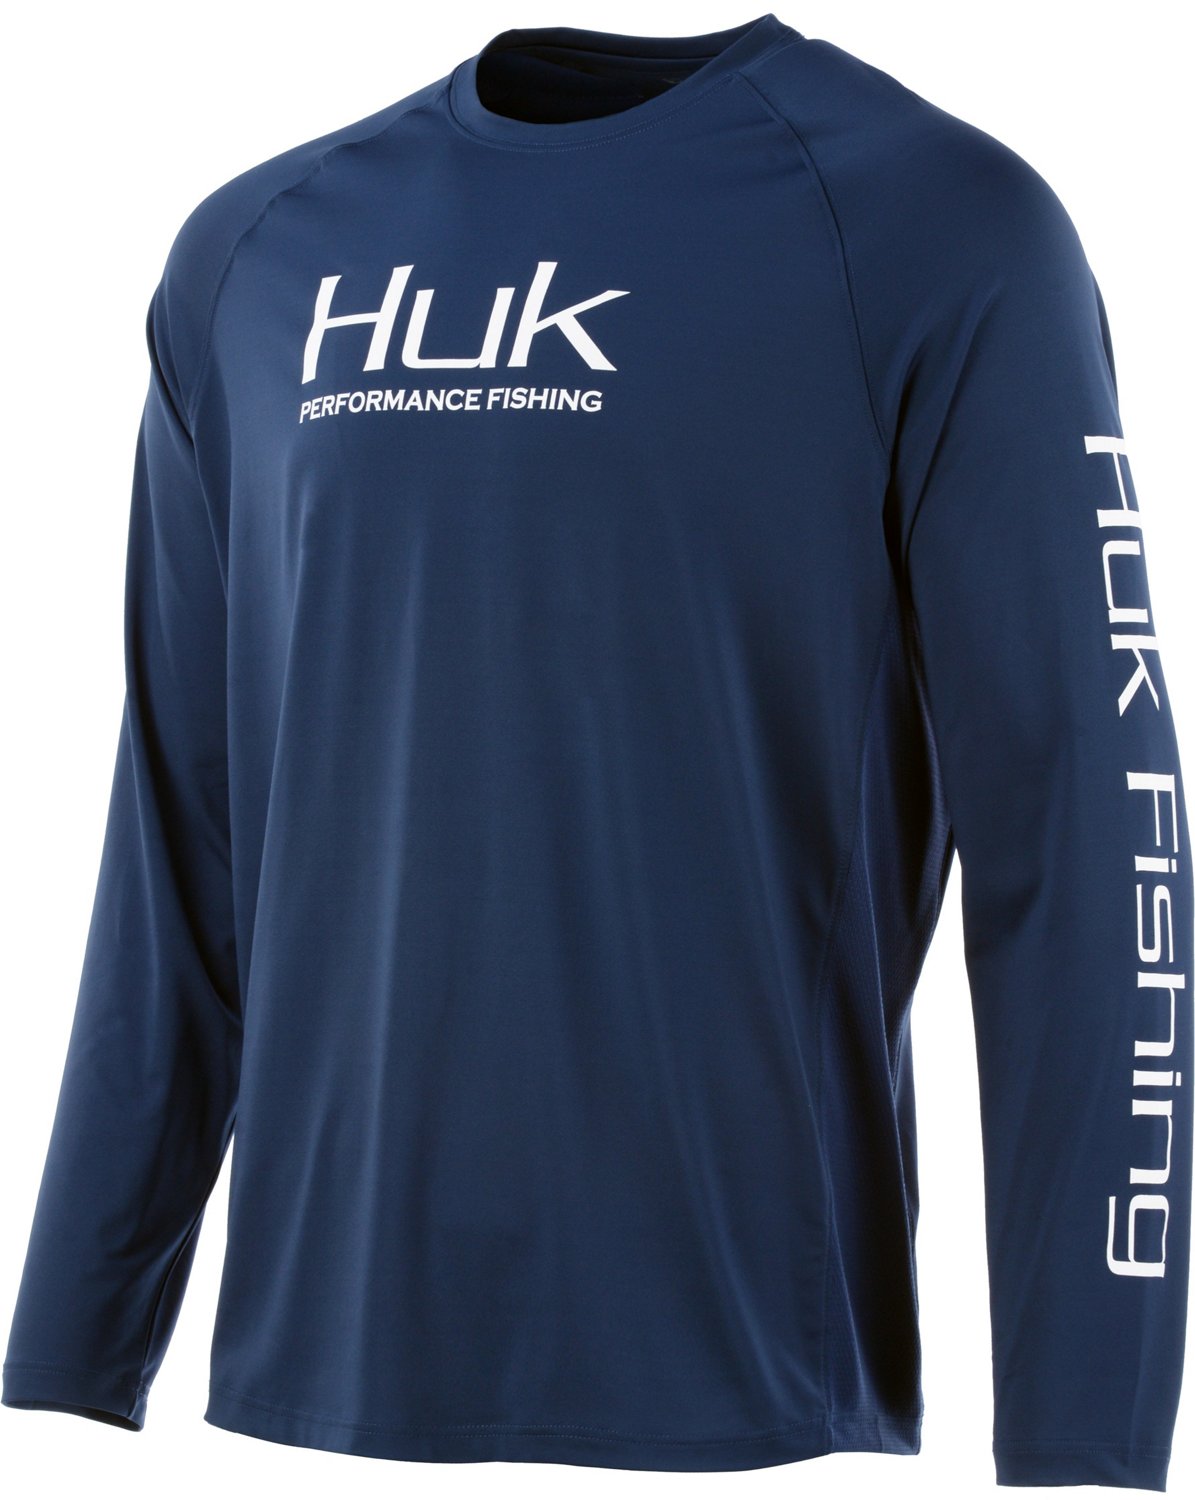 Huk Men's Pursuit Vented Breathable Long Sleeve Shirt